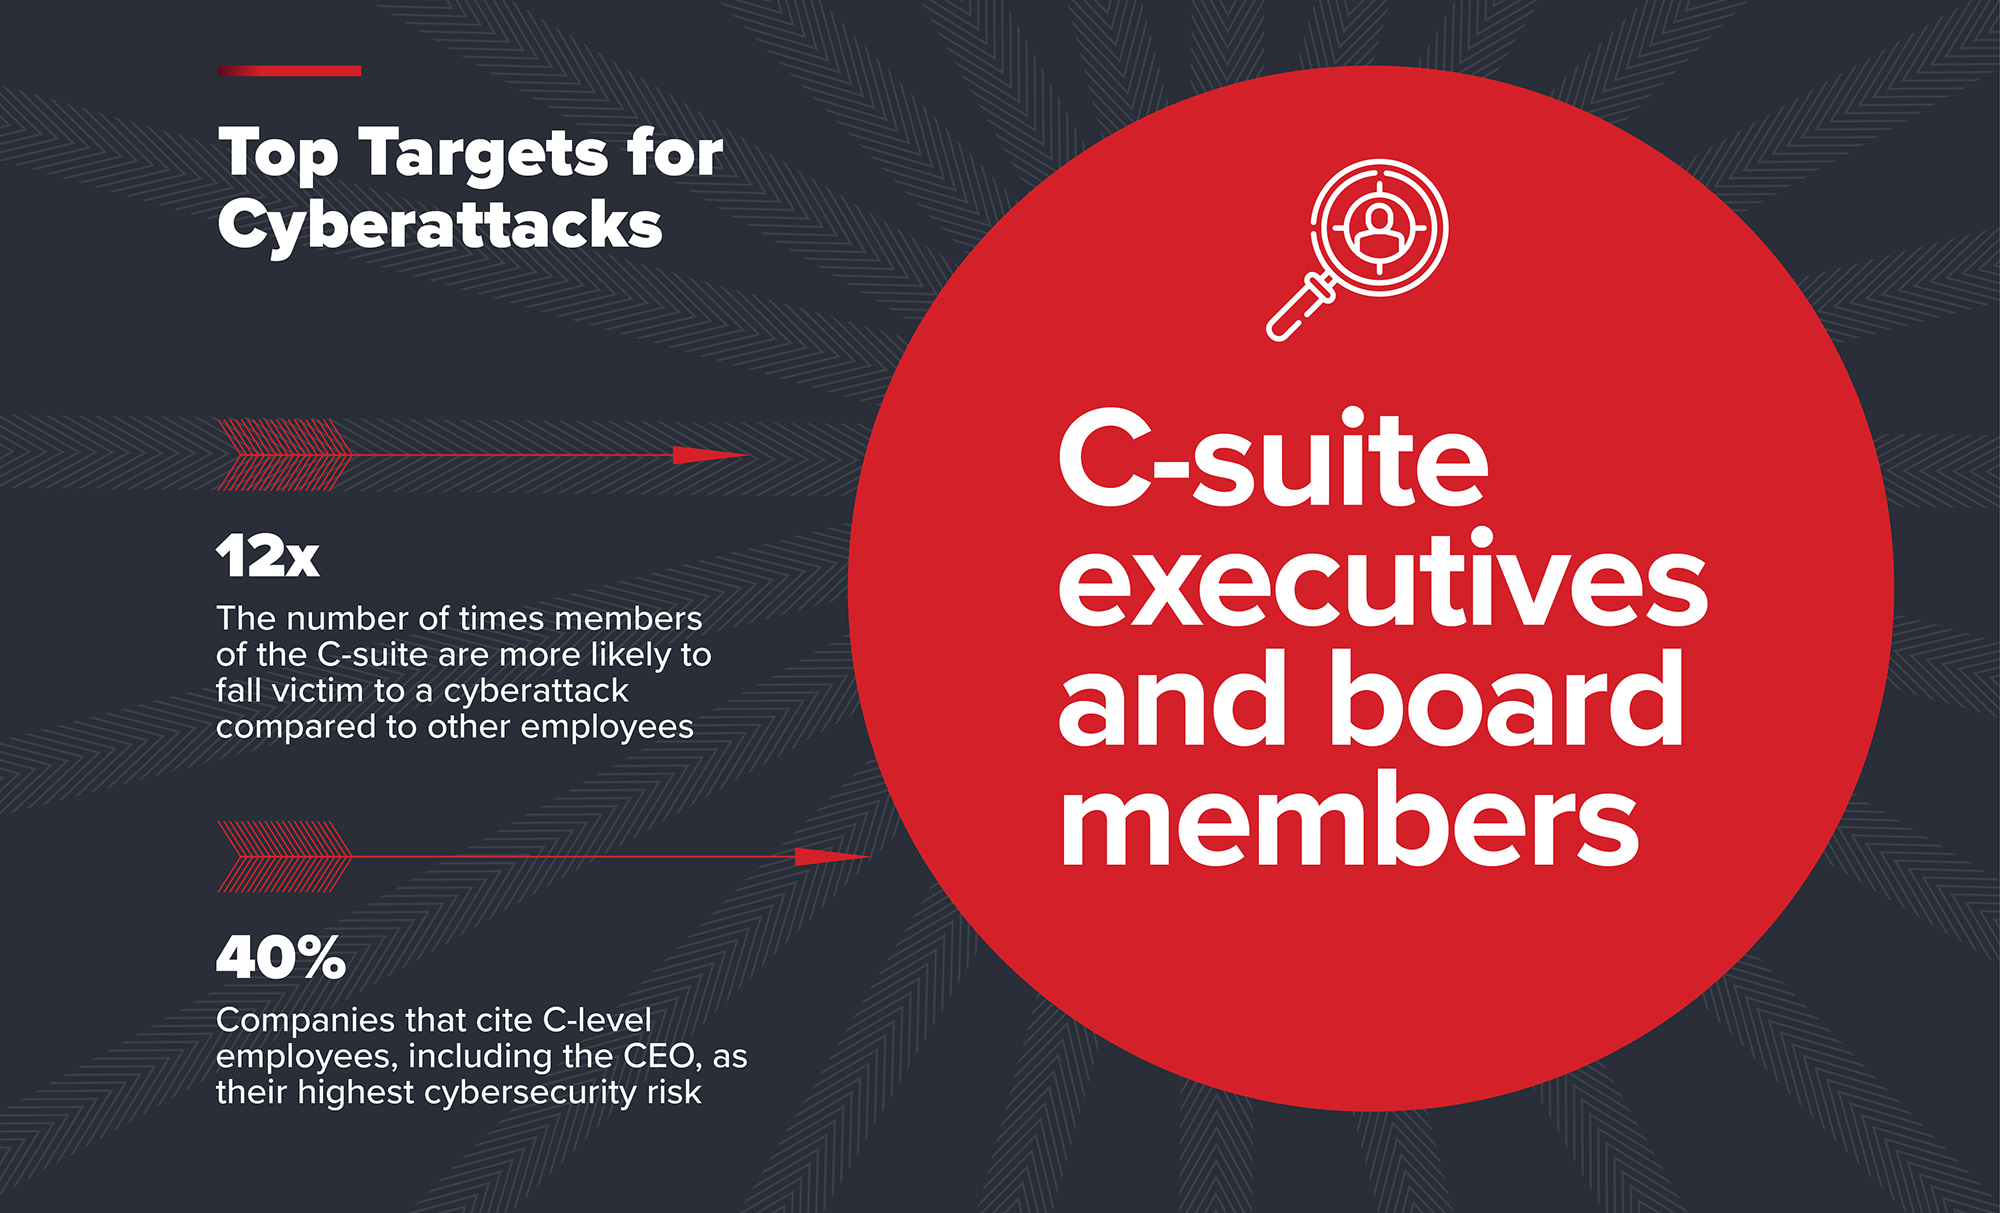 Top Targets and Sources of Cyberattacks